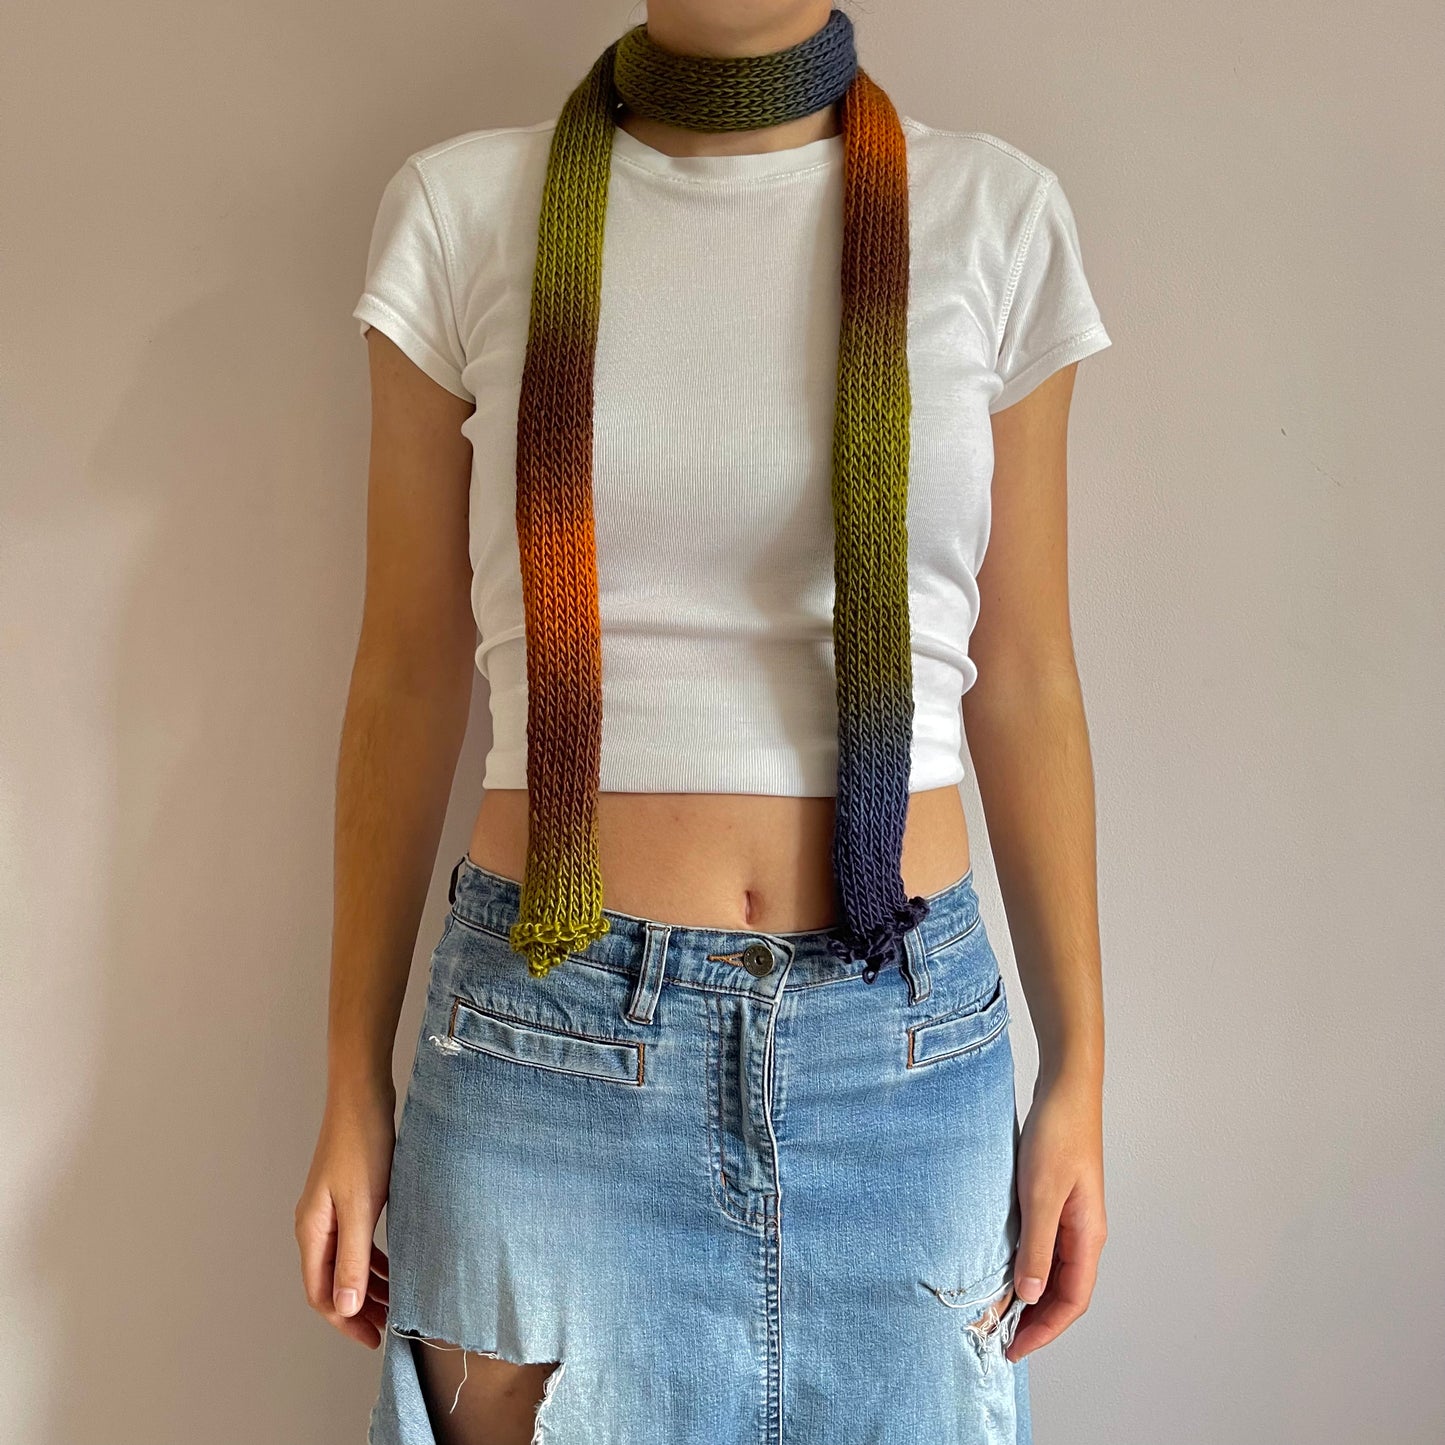 Handmade knitted ombré skinny scarf - Aspen colourway